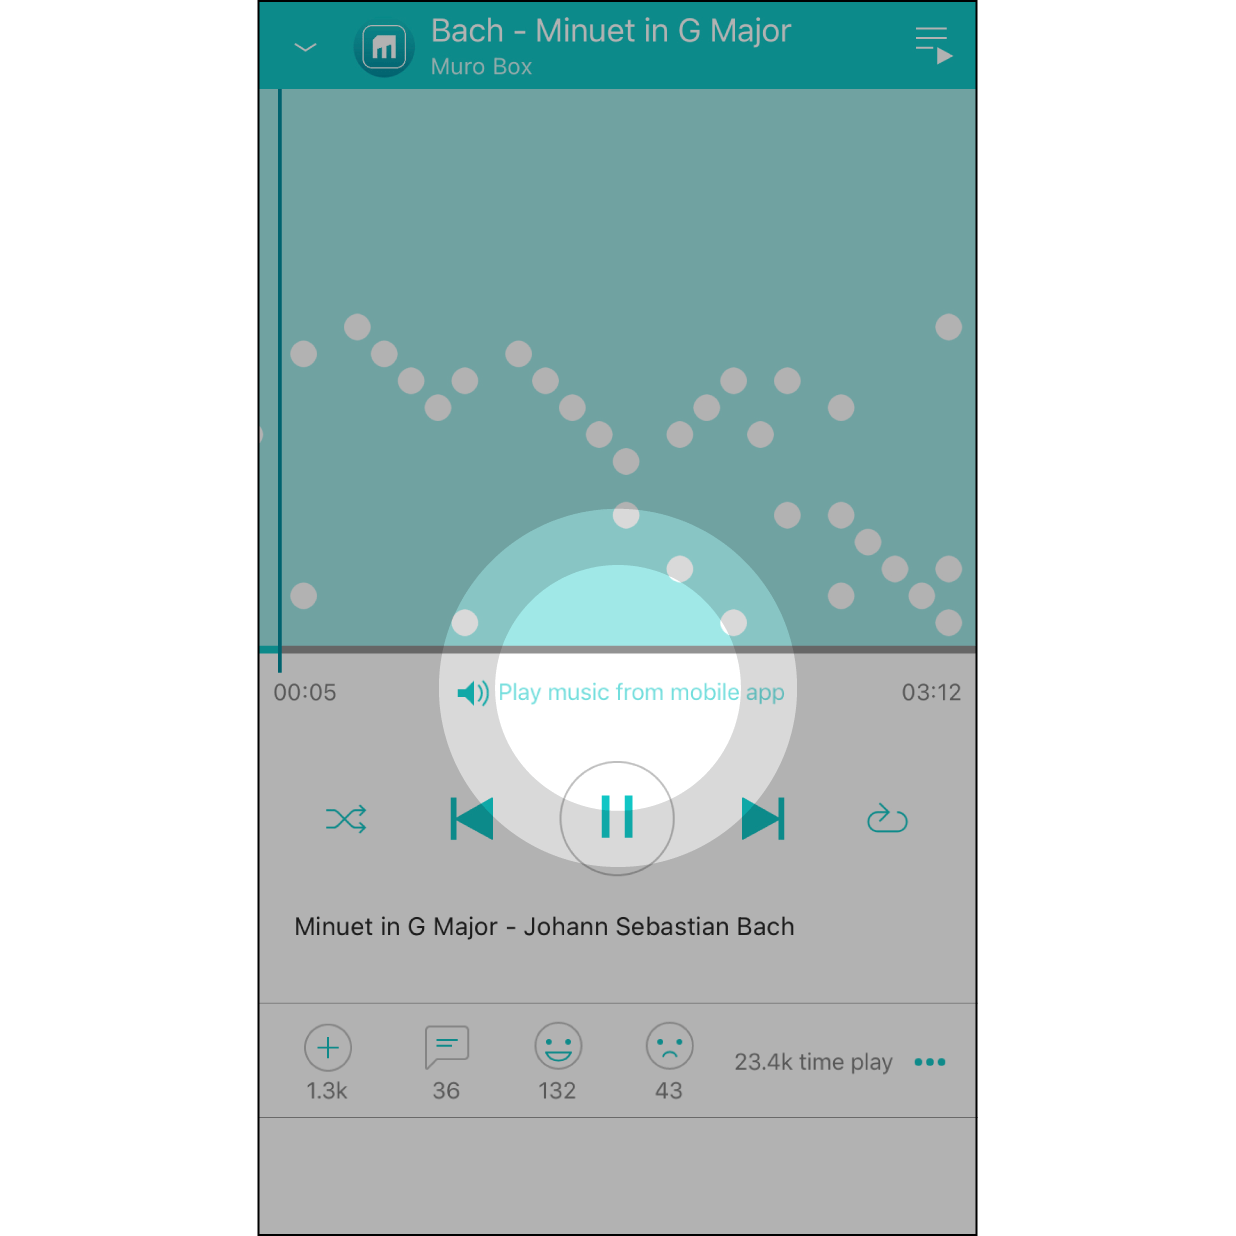 Play Music from the App or Muro BoxWhen the app is connected to Muro Box, hit “Play music from mobile app/Muro Box”, to select the playing source.